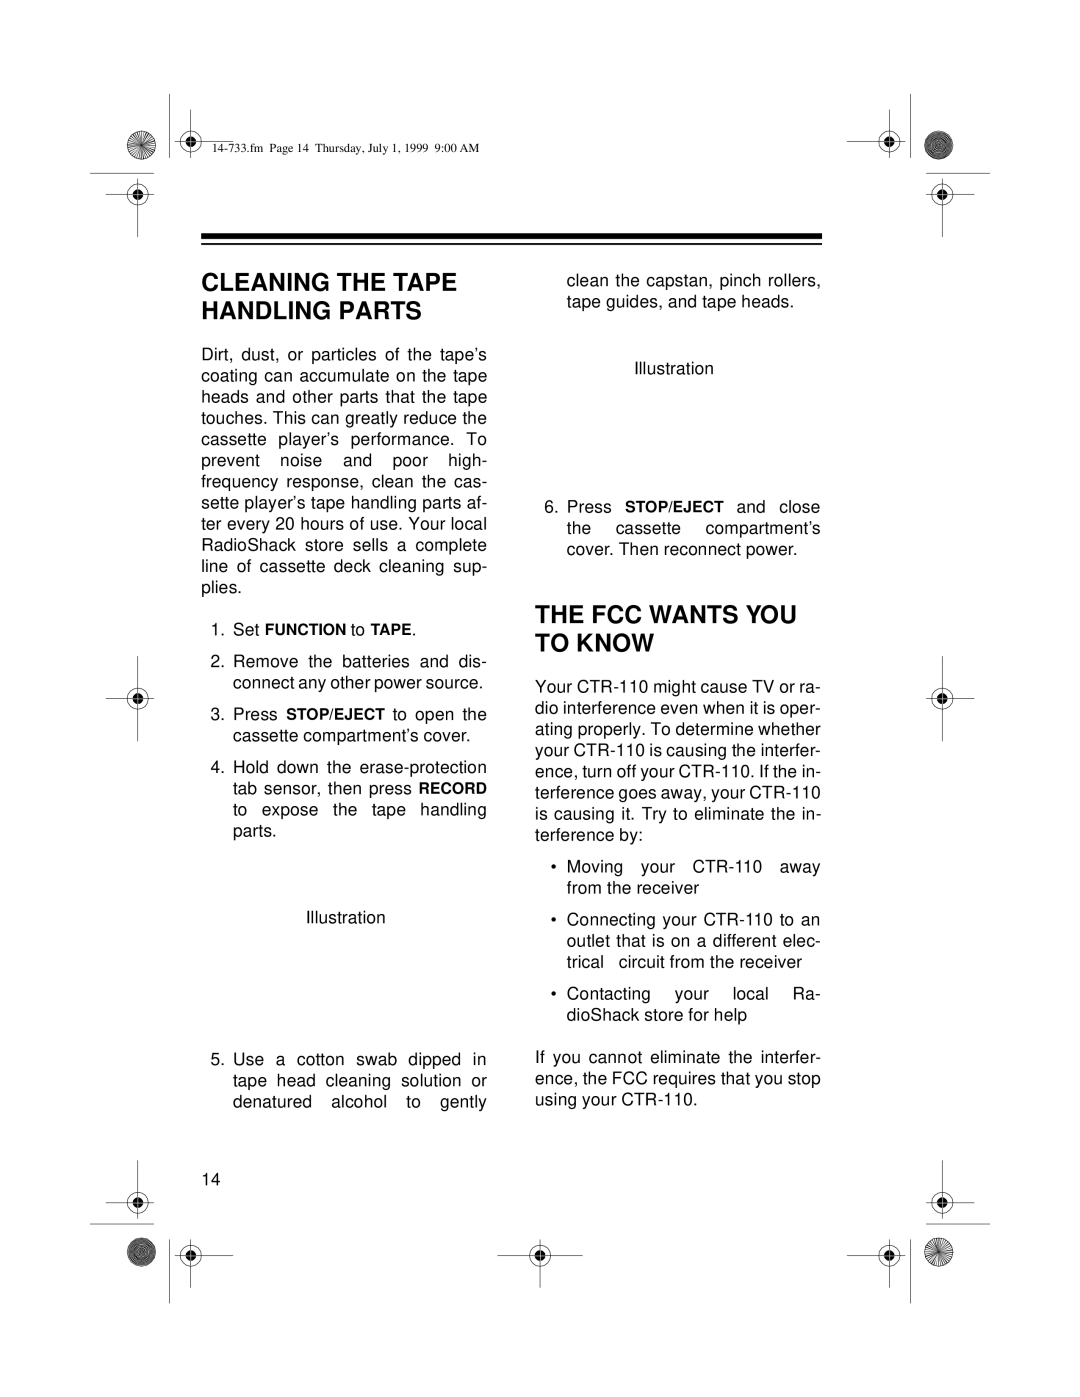 Optimus CTR-110 owner manual Cleaning The Tape Handling Parts, The Fcc Wants You To Know 